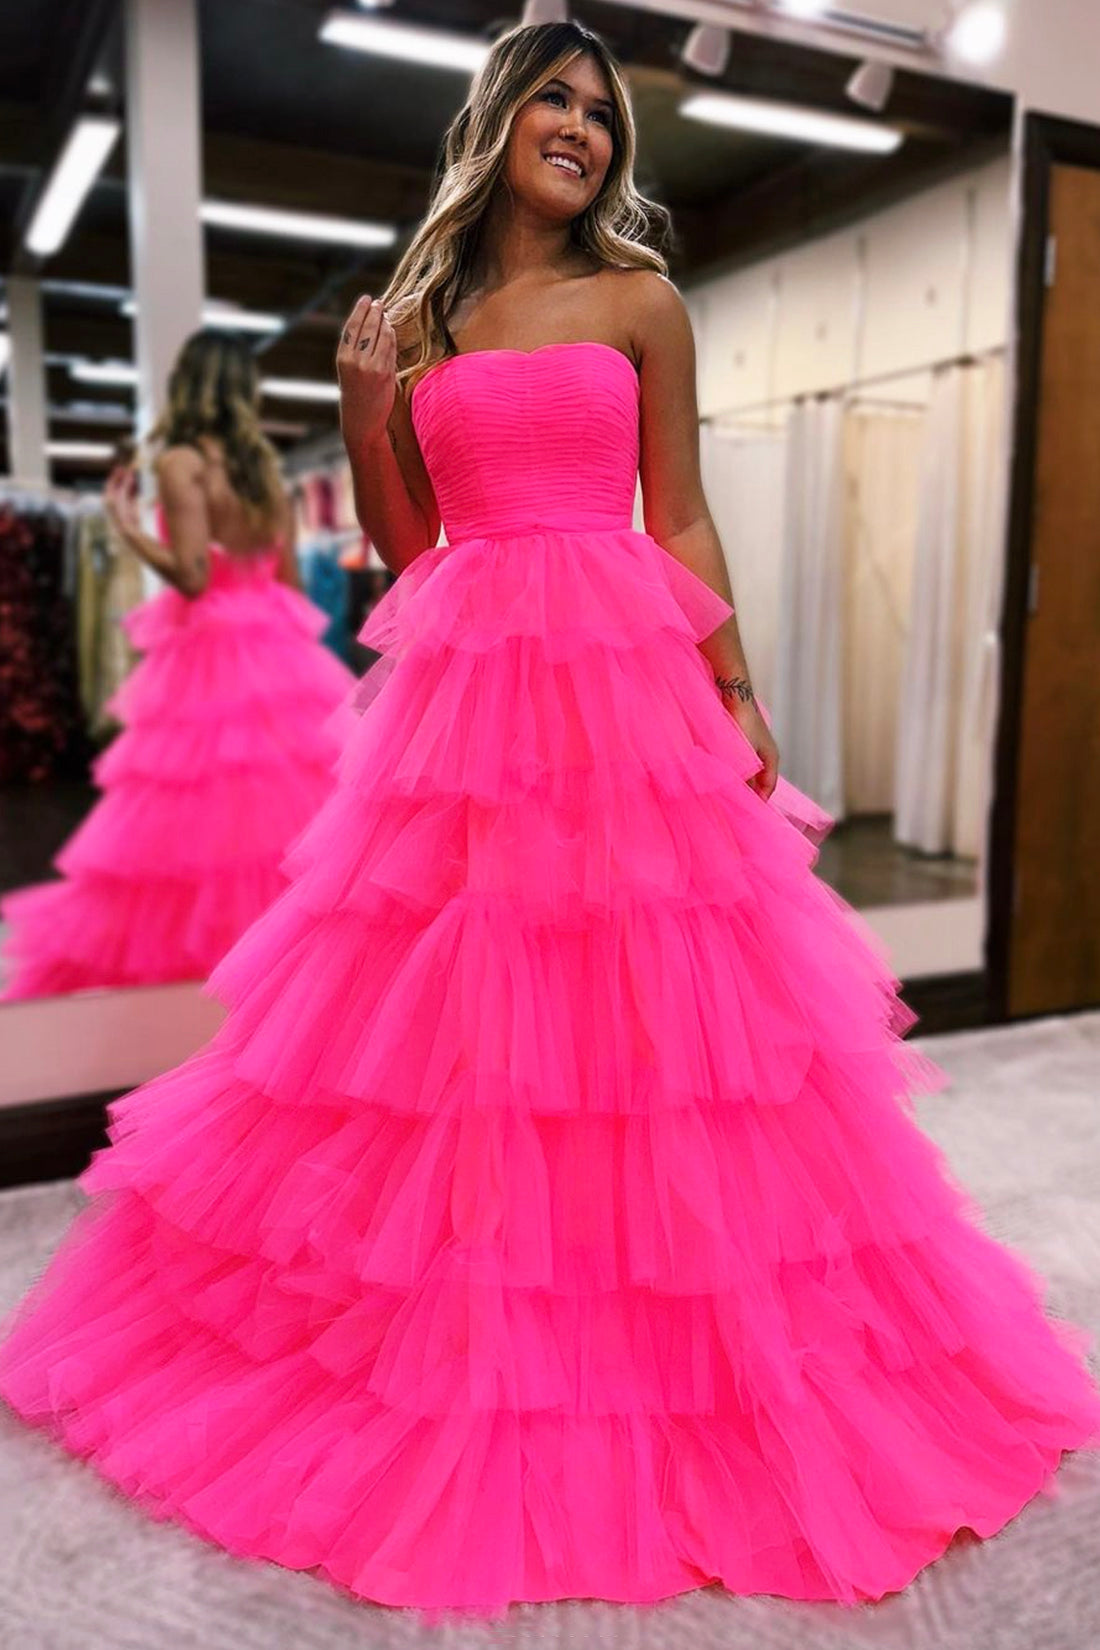 Hot Pink Strapless Tulle Long Prom Dress, Cute A-Line Evening Dress